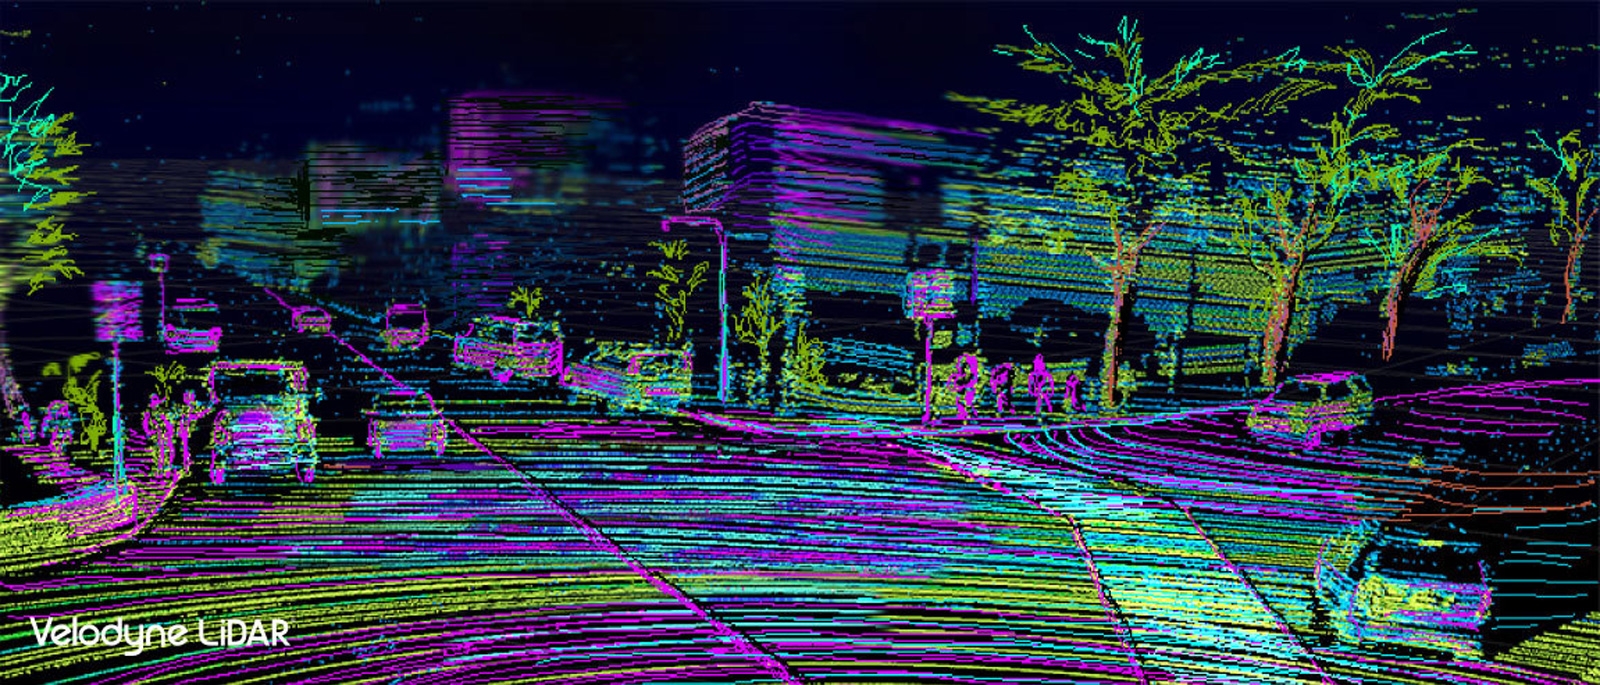 Velodyne LiDAR helps self-driving cars operate at highway speeds | DeviceDaily.com